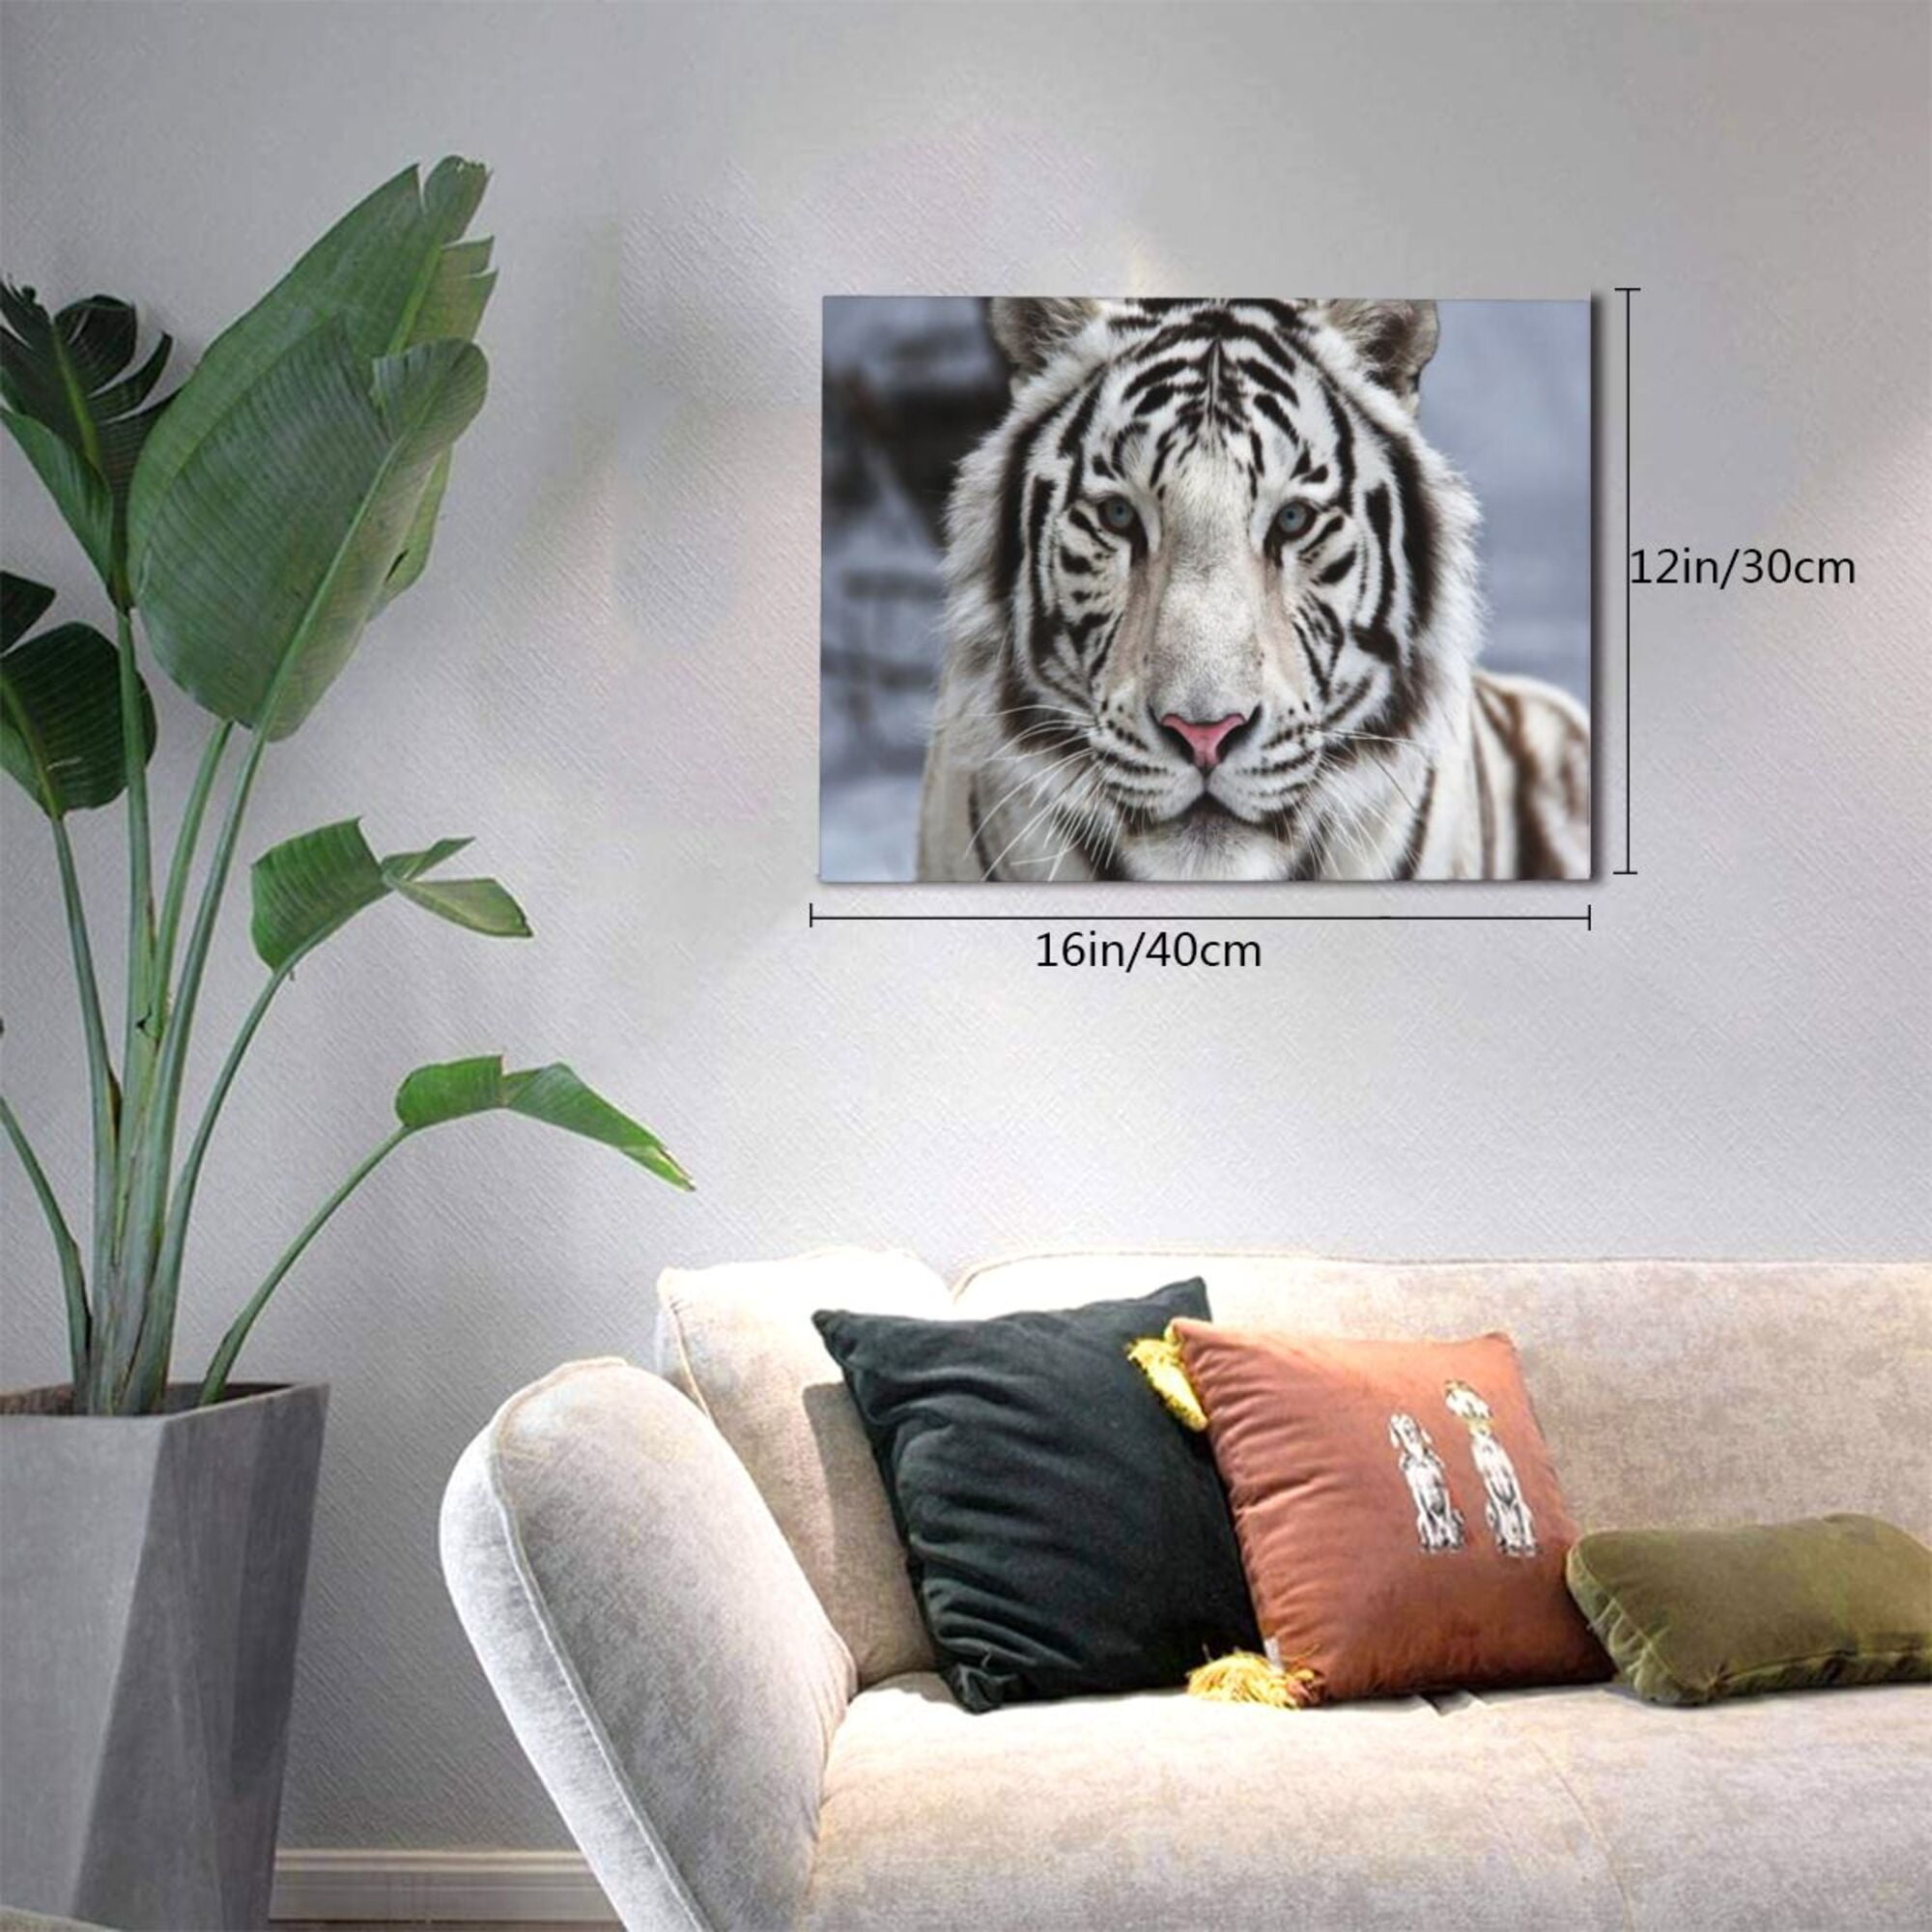 Decor Painting Artwork Bathroom Bedroom Tiger White Modern Framed Decorations Bathroom Room For 12x16in Decor Living Wall Canvas